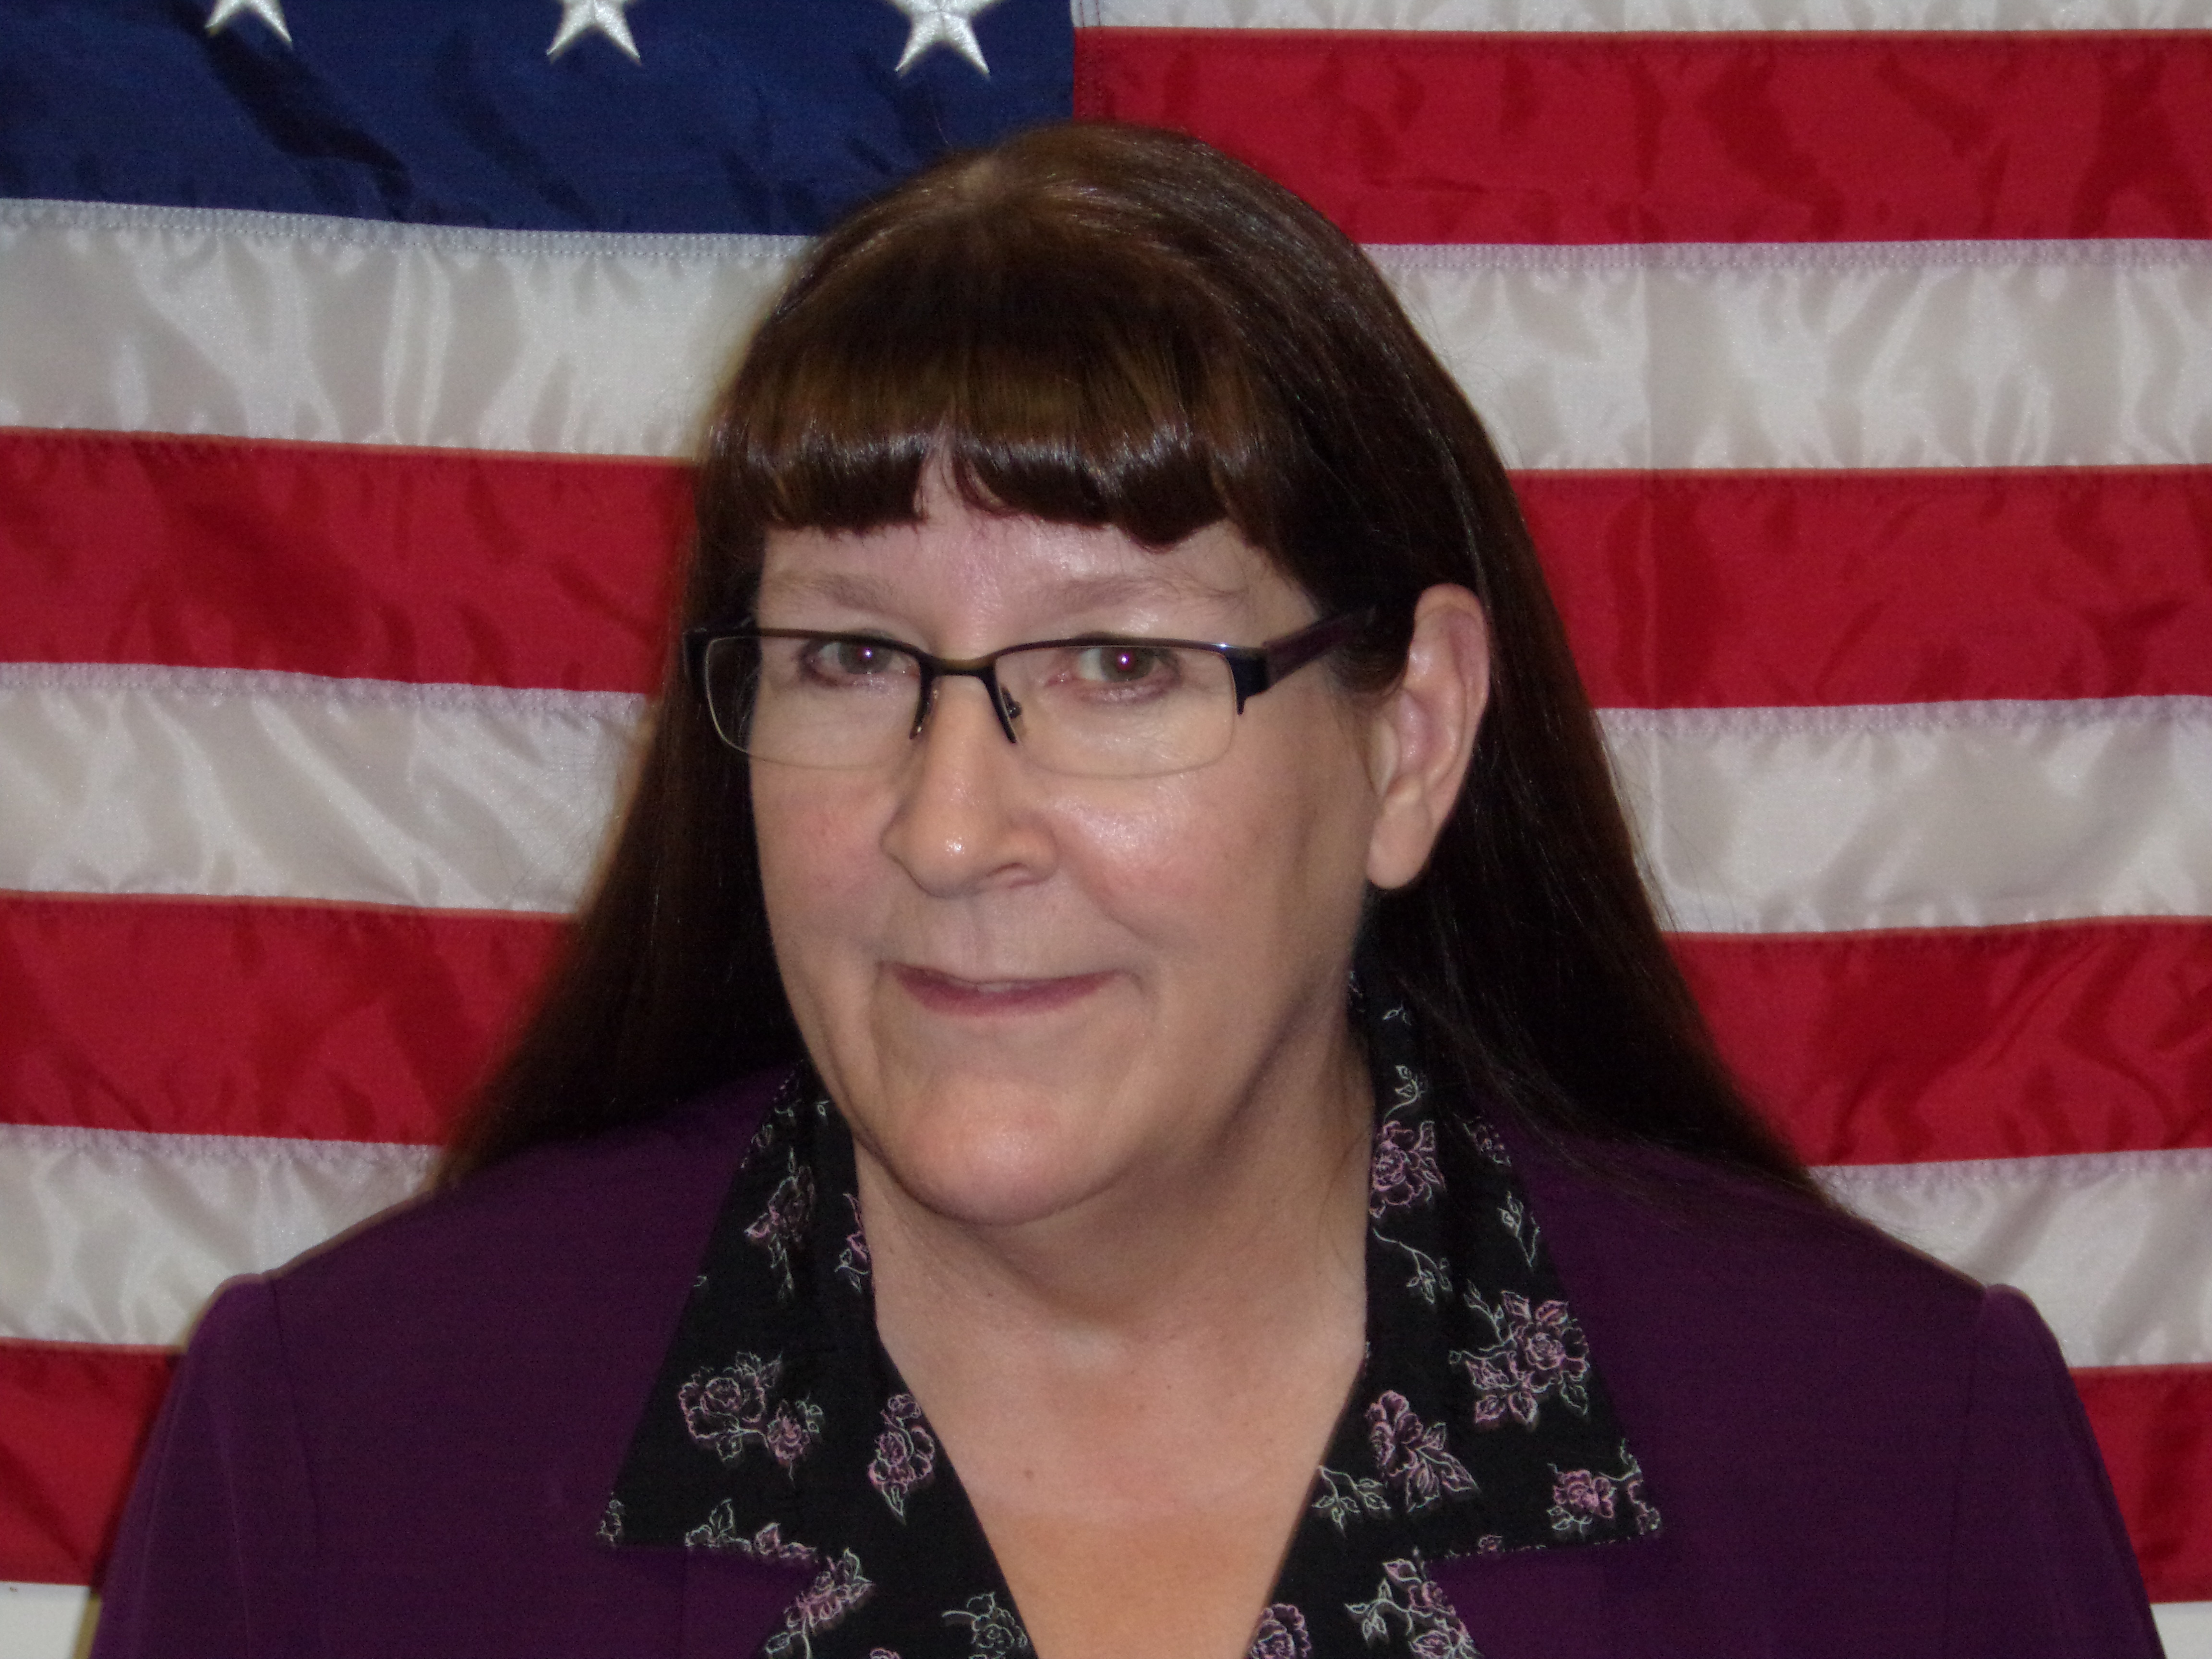 District 4 Barnes County Commissioner Vicky Lovell